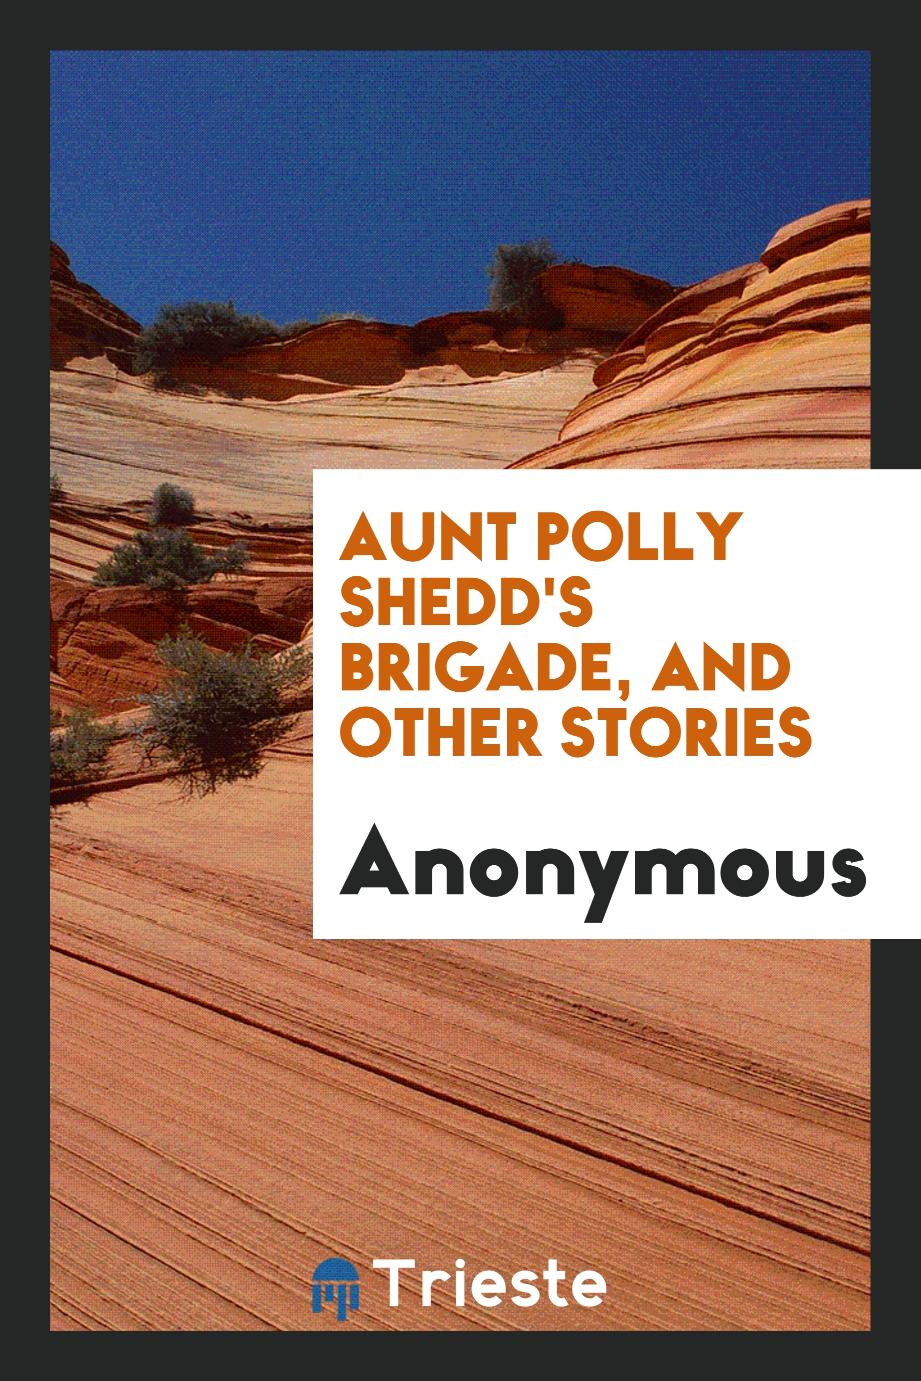 Aunt Polly Shedd's Brigade, and Other Stories